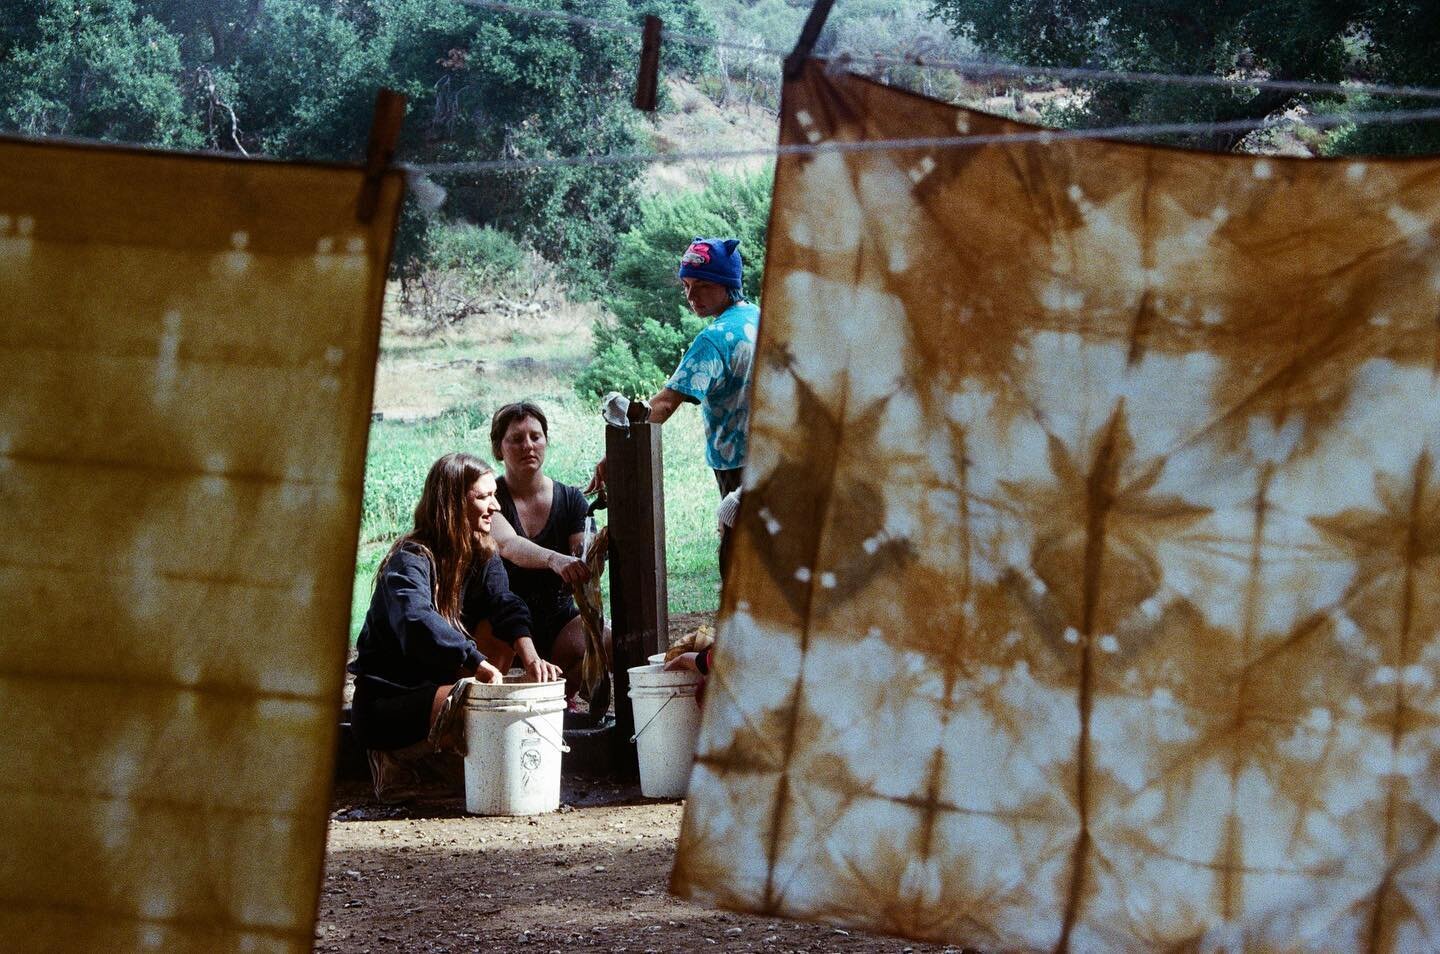 Save the date: the next Plant Dye Retreat will take place on the first weekend of spring, just after the equinox, March 22-24 in the Santa Ynez Mountains north of Ojai. ⛰️✨

We&rsquo;ll camp for two nights in the glorious shelter of an oak woodland, 